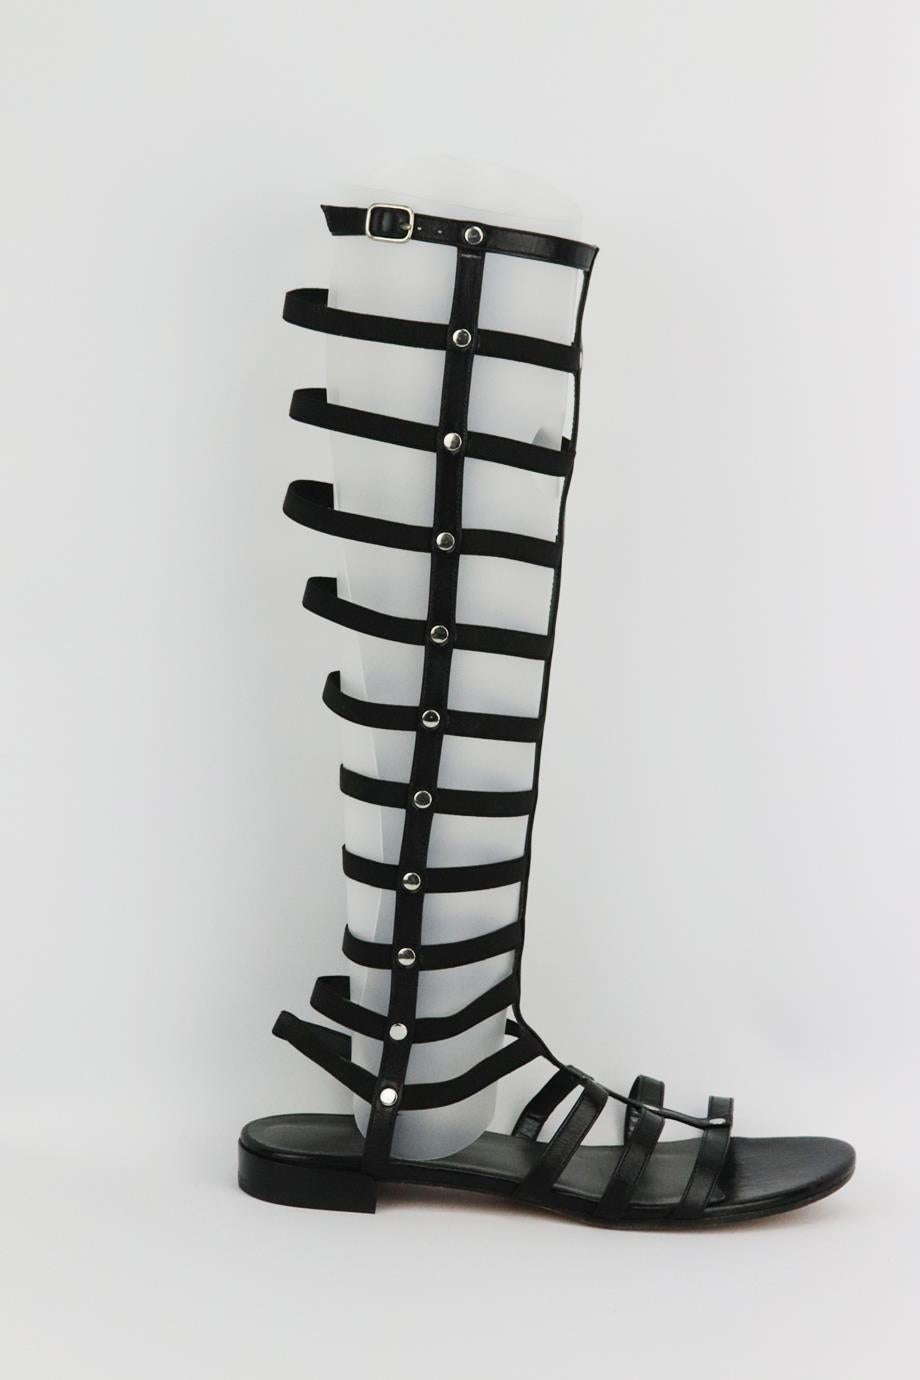 Stuart Weitzman leather knee high sandals. Made from black leather with silver-tone studded detail. Black. Zip fastening at side. Does not come with box and dustbag. Size: EU 38 (UK 5, US 8). Shaft: 14.2 in. Insole: 9.8 in. Heel: 0.8 in
